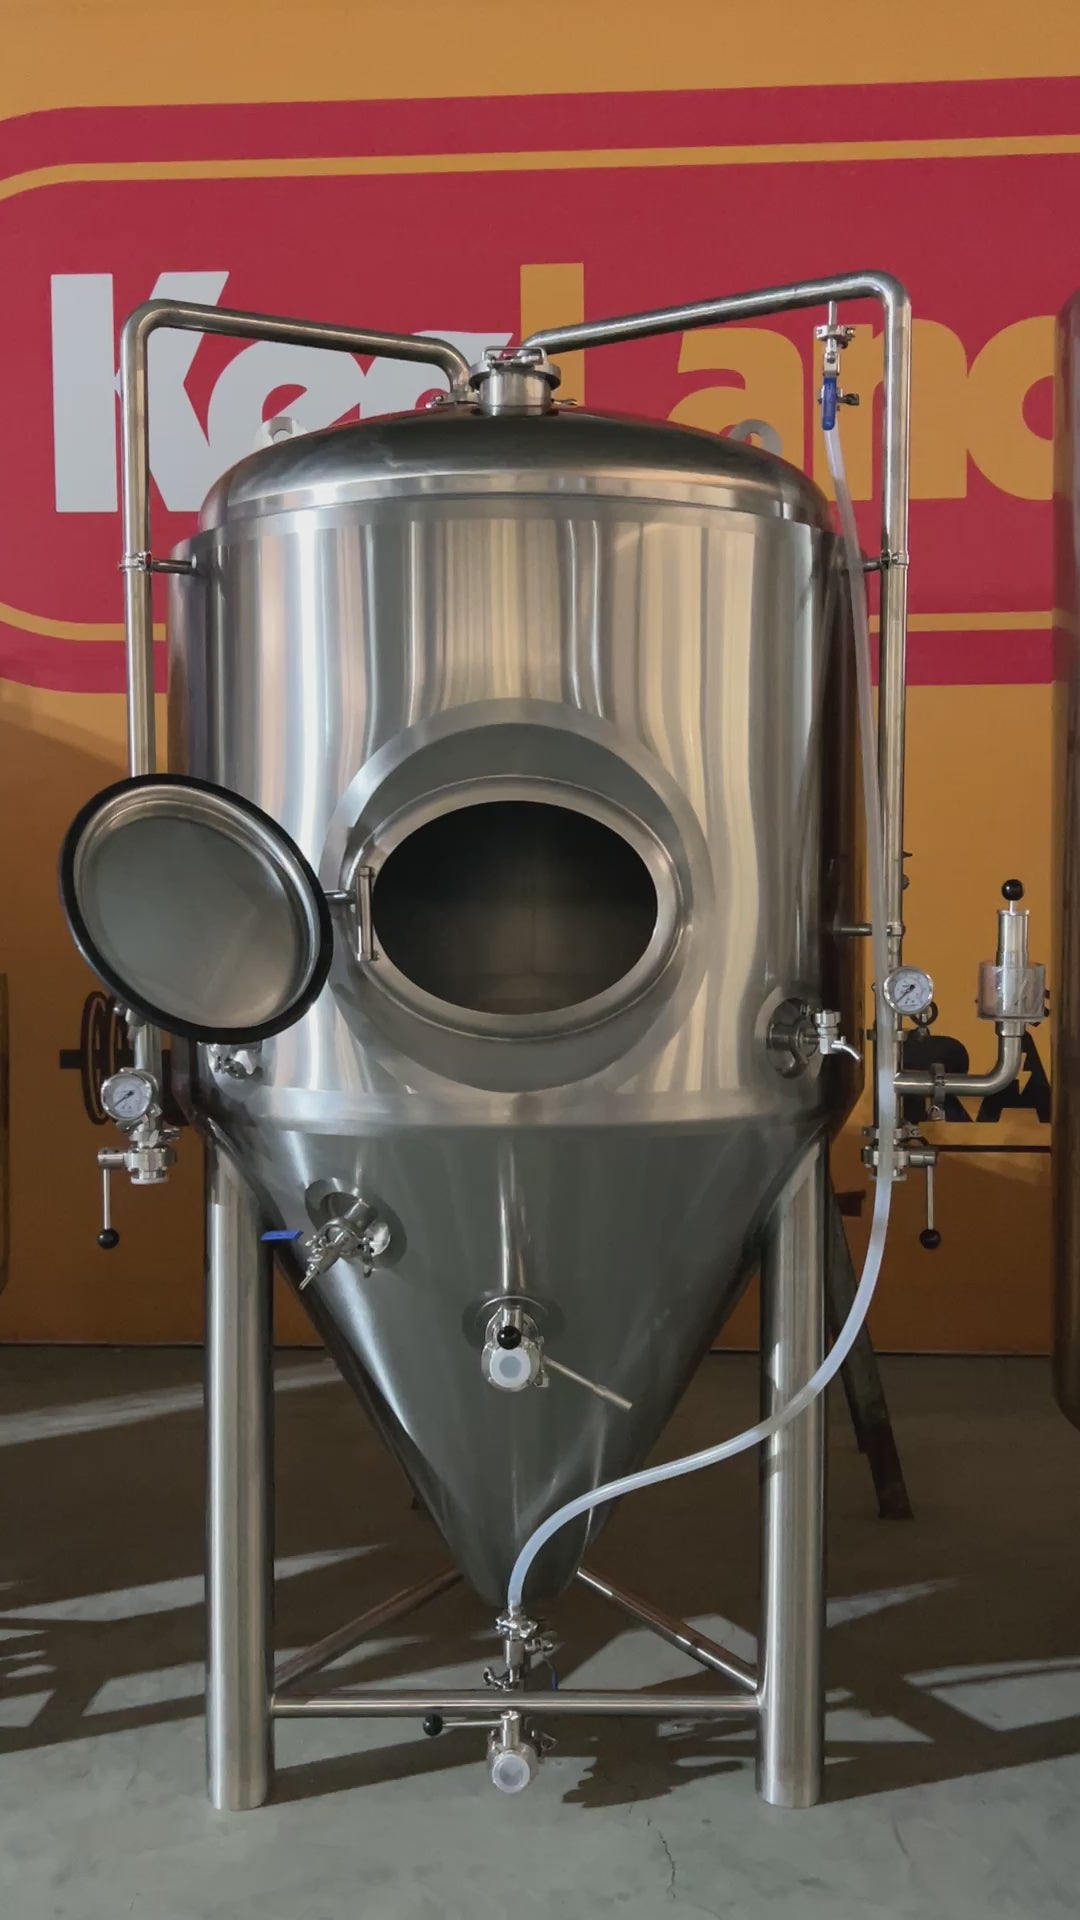 800L Conical Fermenter with Dimple Jacket and Insulation - Micro Brewery - Brewpub - Unitank - Bright Beer Tank